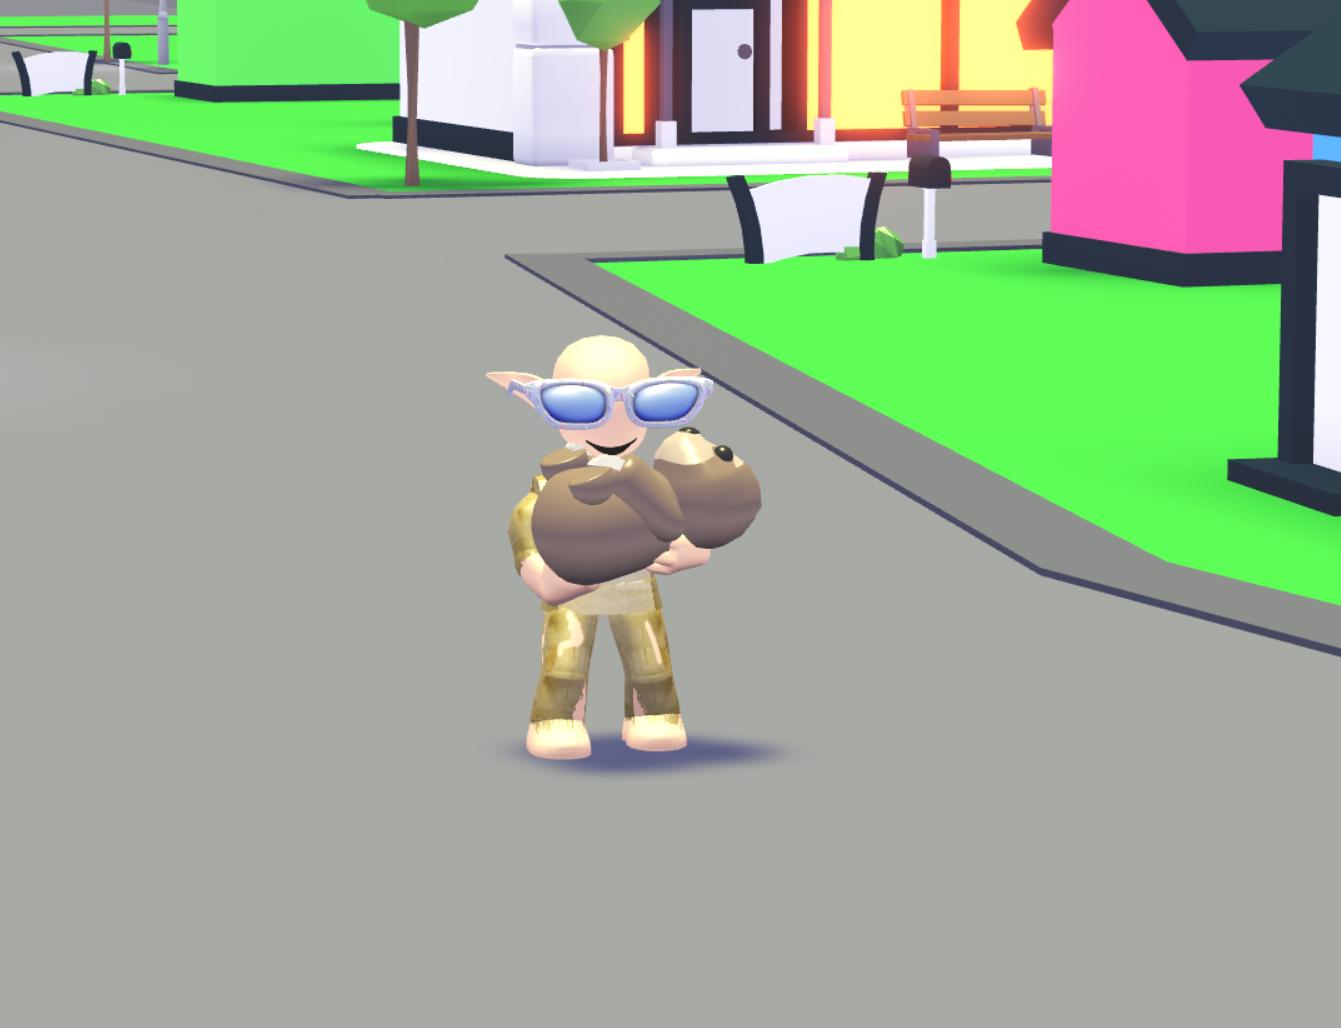 Roblox Developer Relations On Twitter Hey Developers Do Your Games Have Obtainable Pets They Re A Great Way To Keep Players Engaged Look At This Cute Little Sloth In Adopt Me Roblox Robloxdev - devconsole on twitter the roblox web api standard